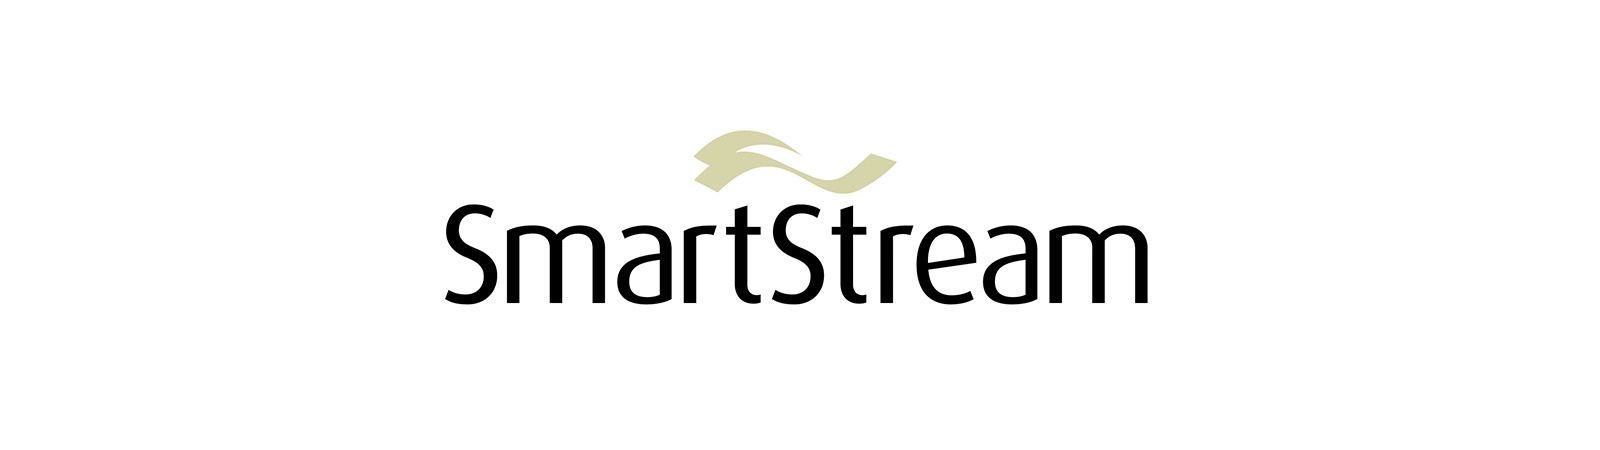 SmartStream extends Public API to promote access to collateral management technologies